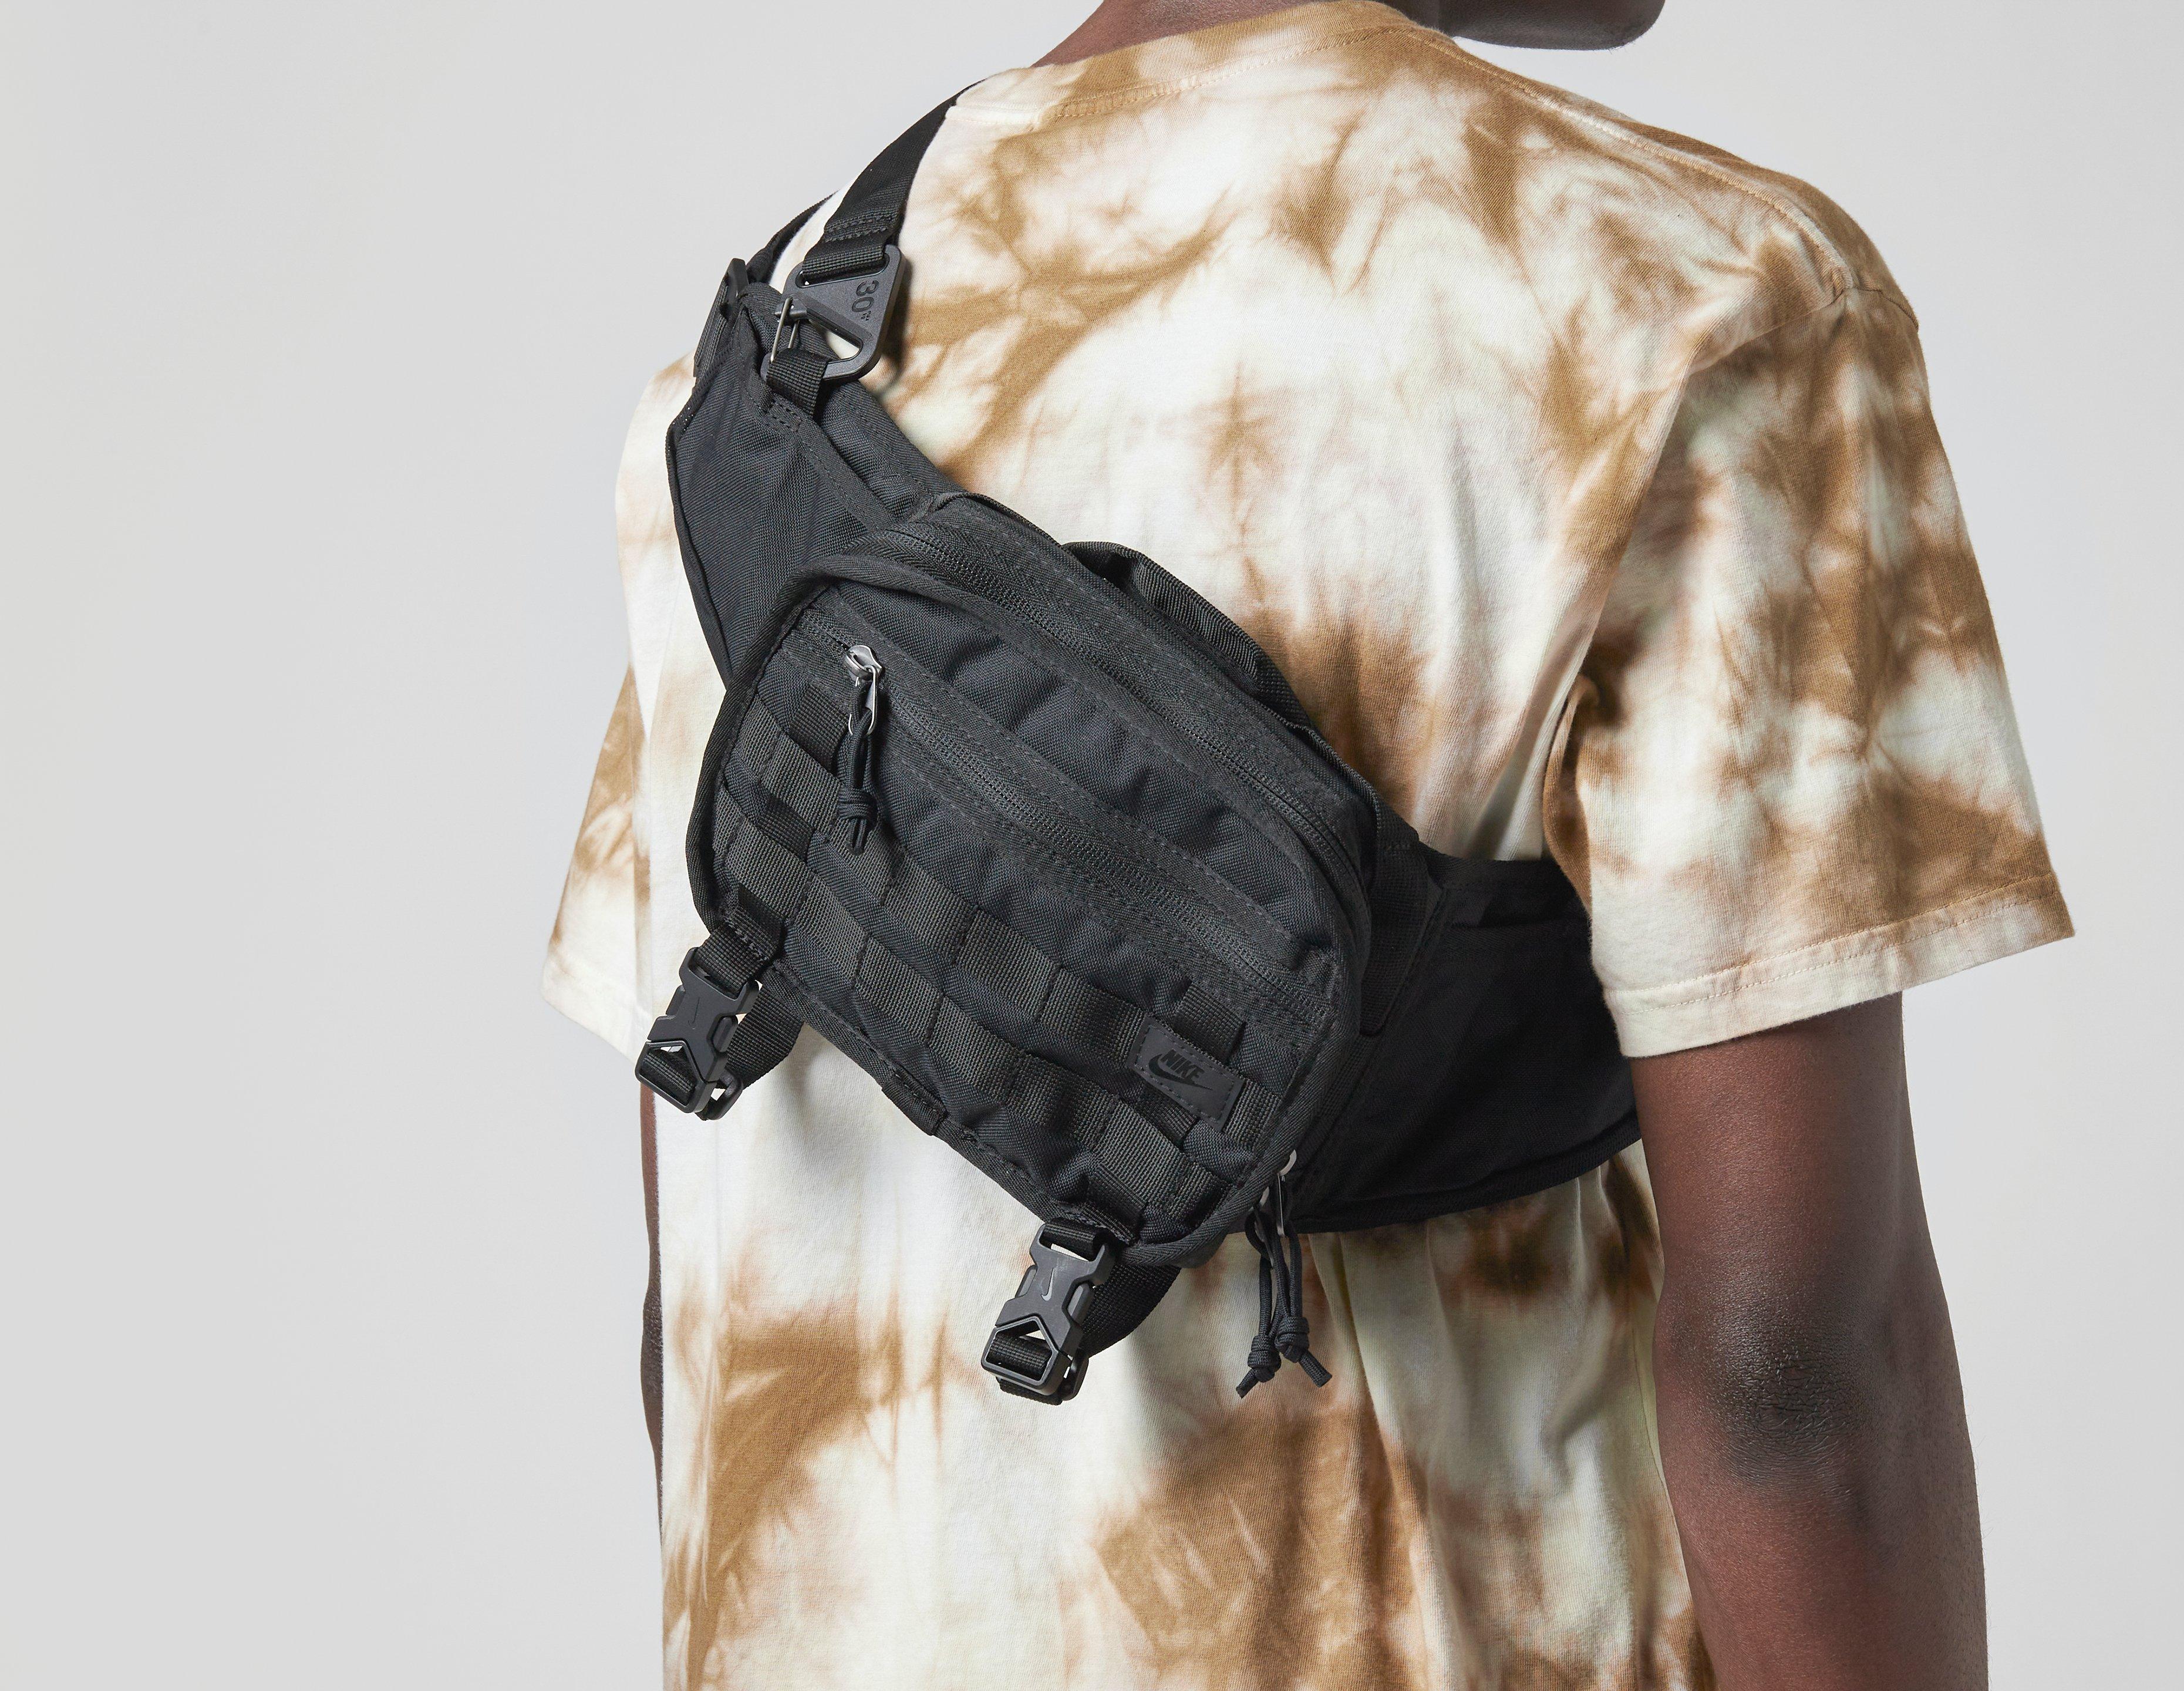 chest harness bag nike